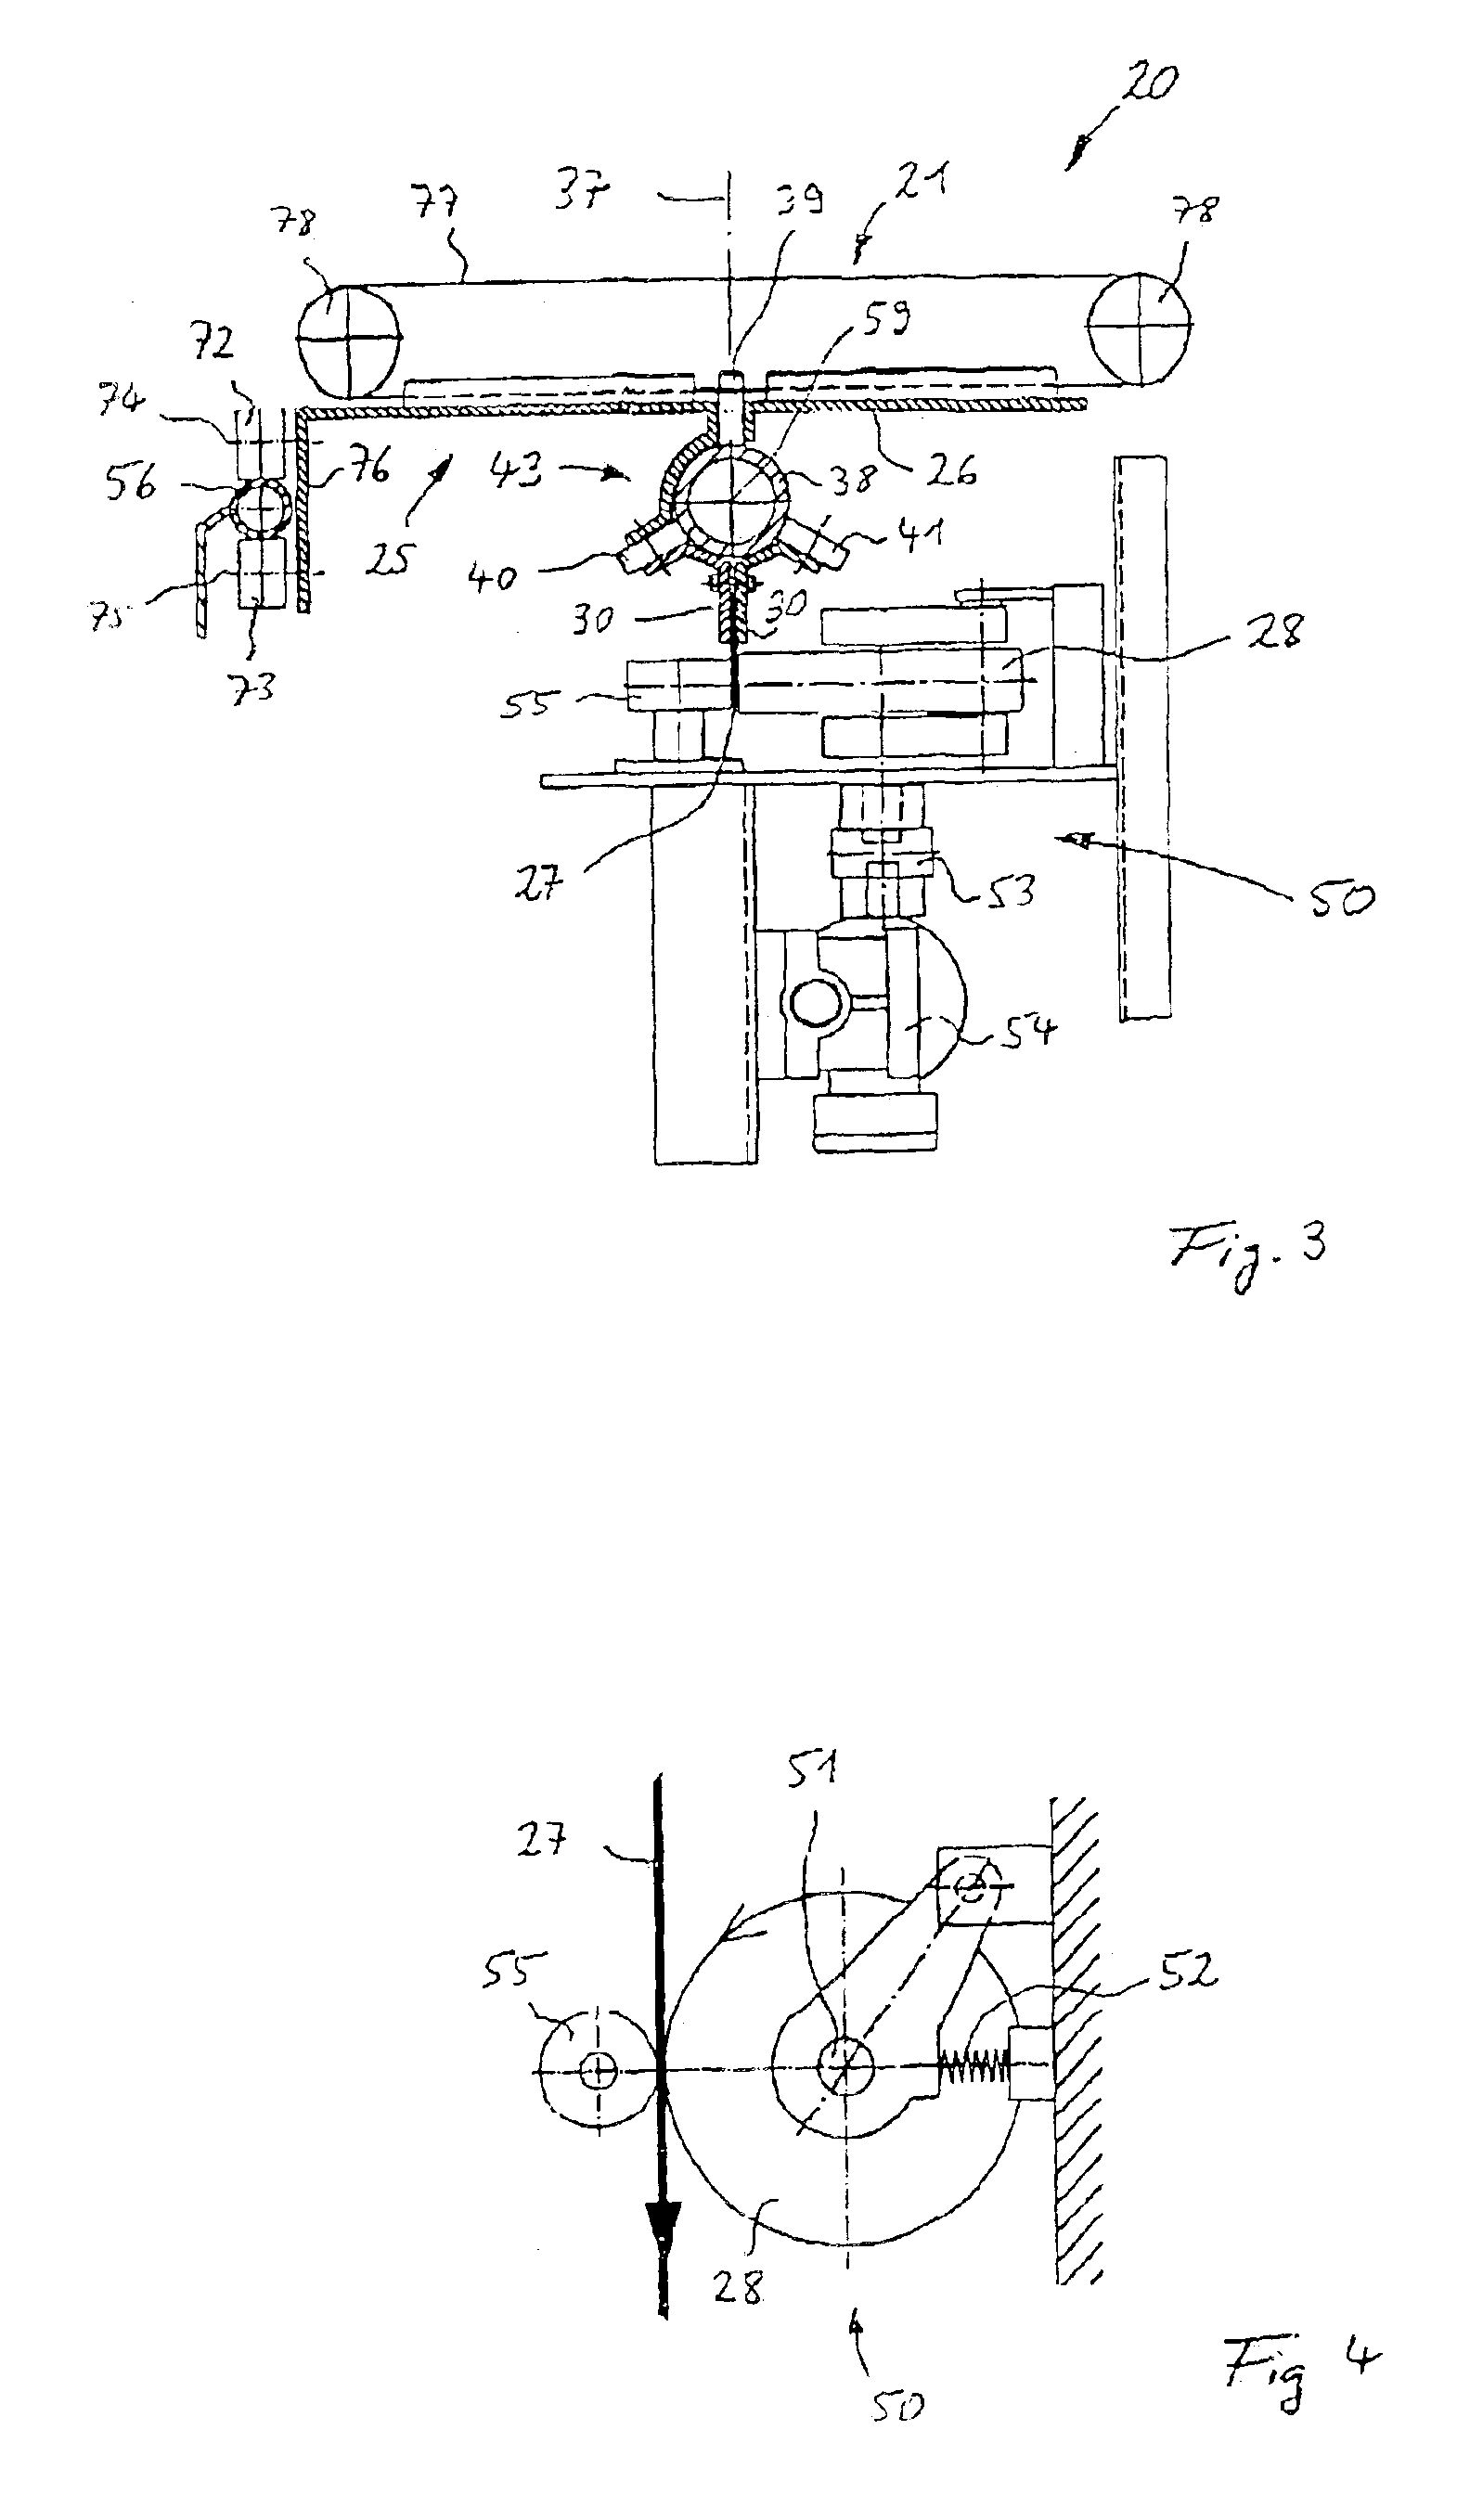 Device for conveying piece goods